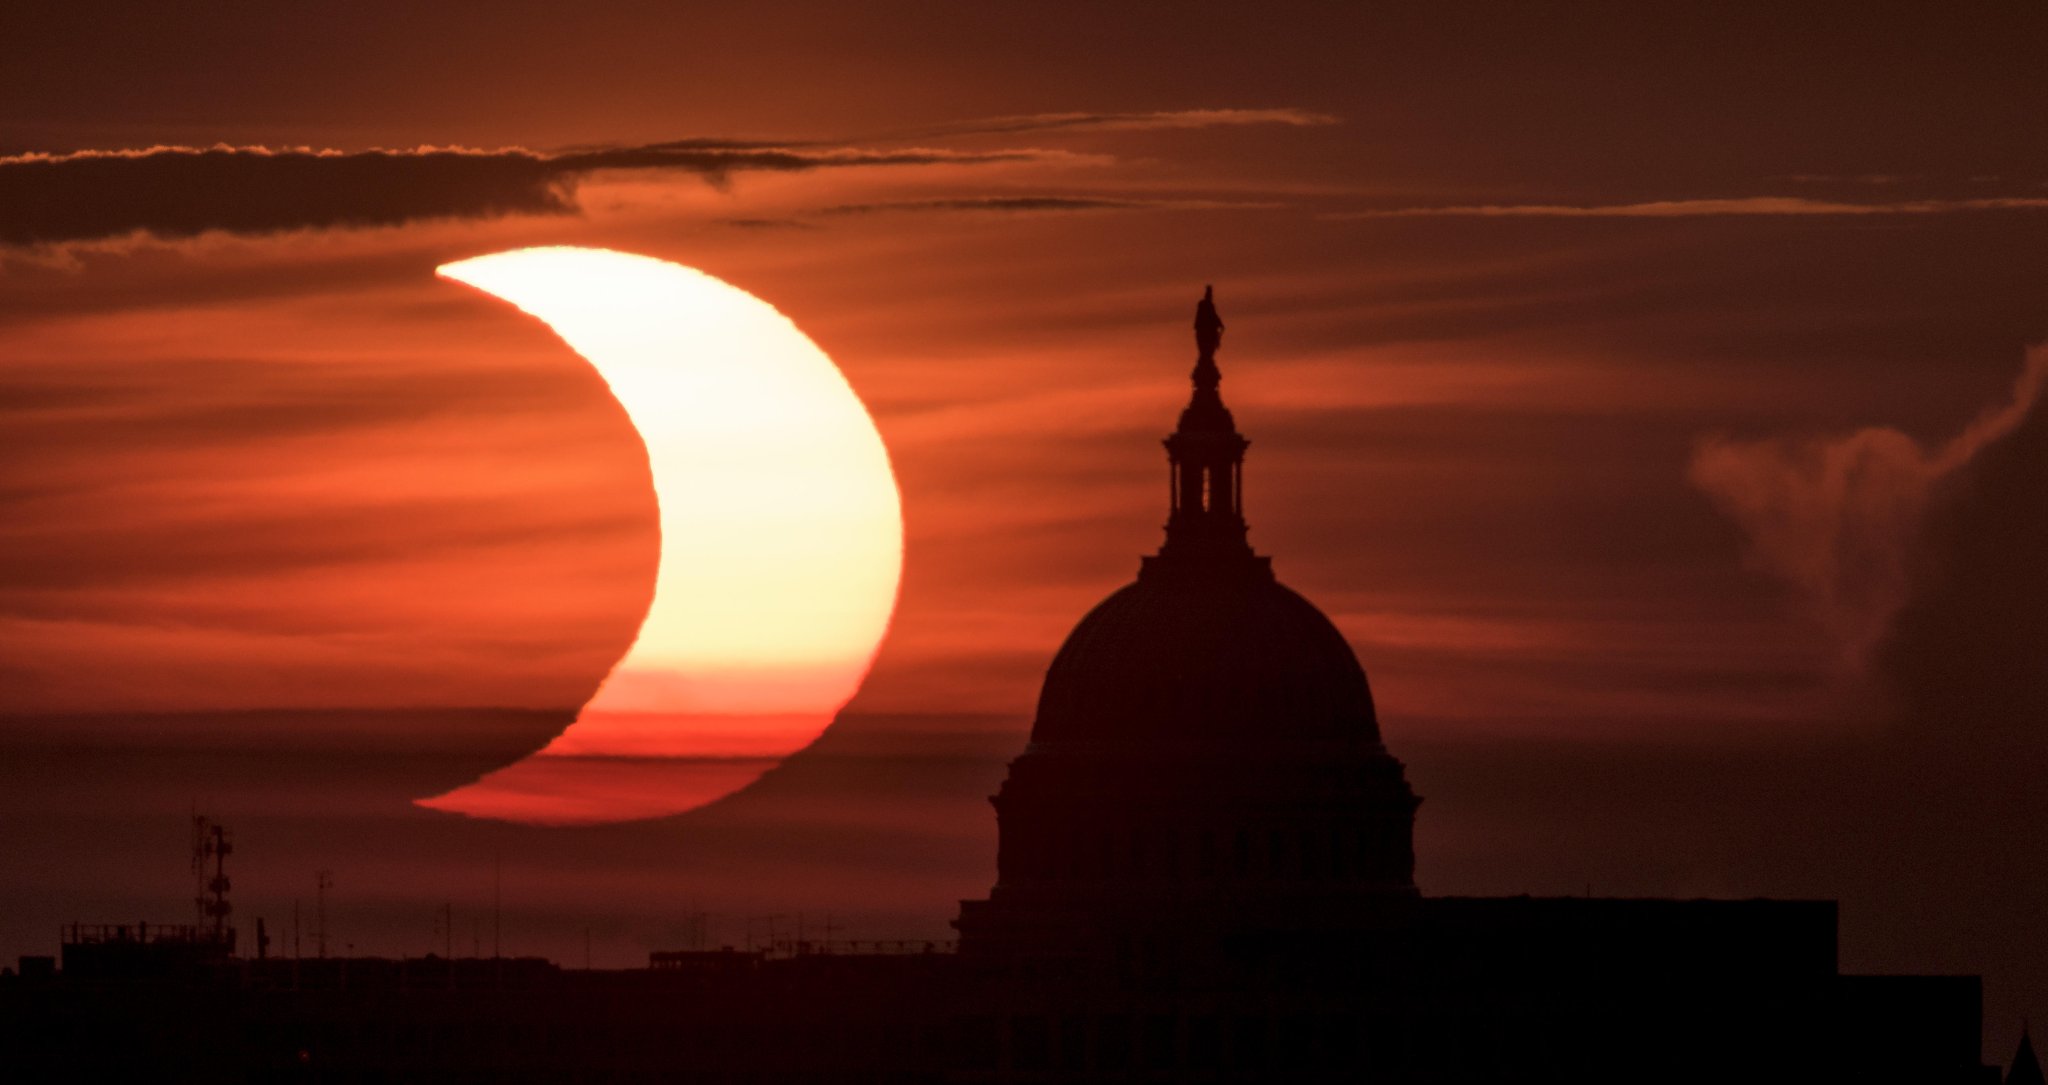 Rare "ring of fire" solar eclipse captured in spectacular photos from around the world